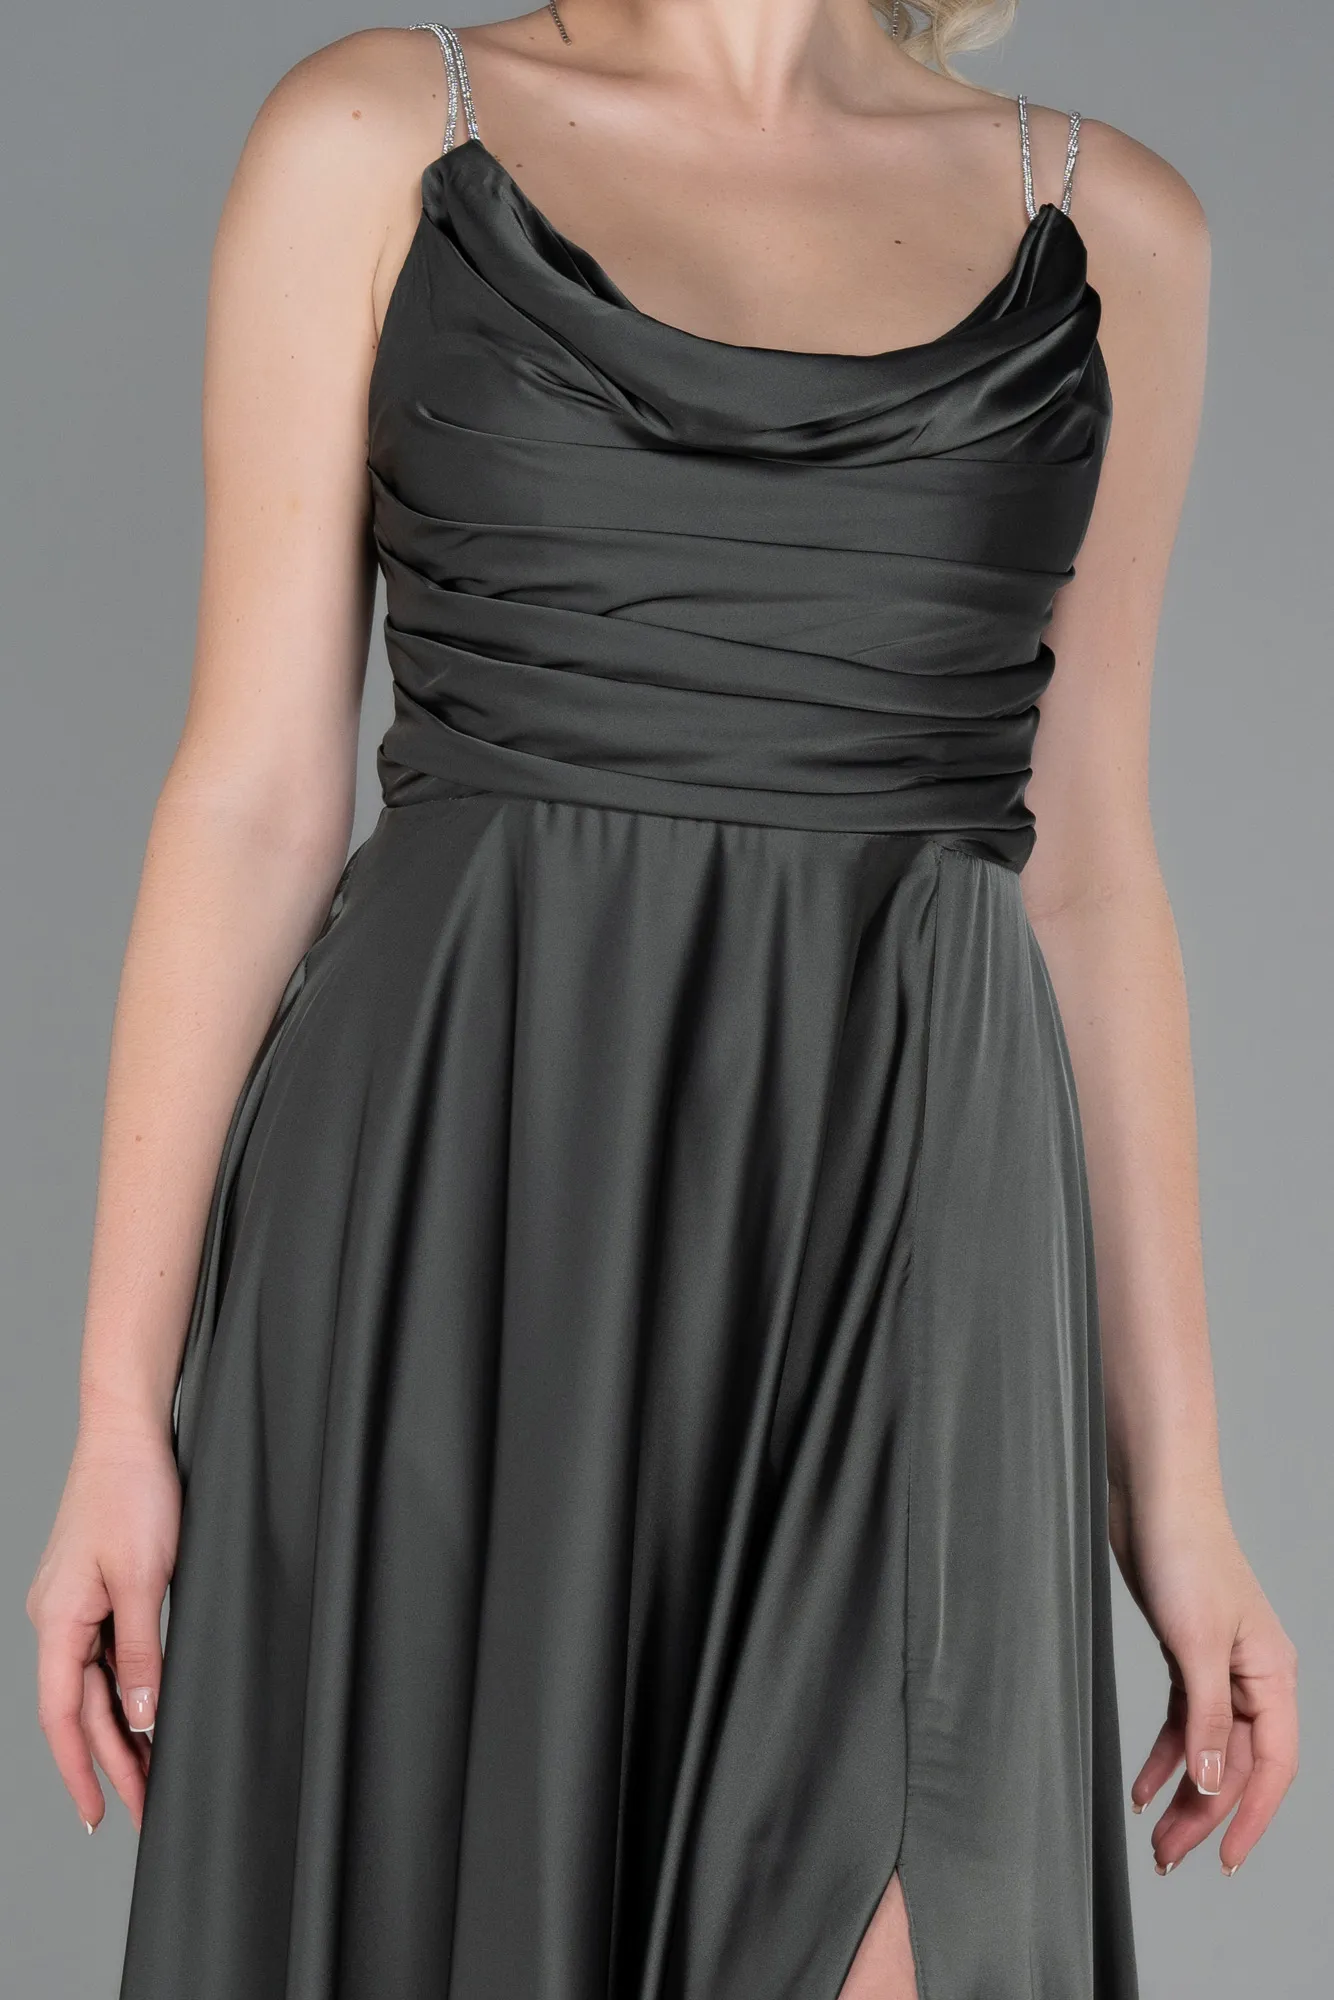 Olive Drab-Long Satin Prom Gown ABU3275